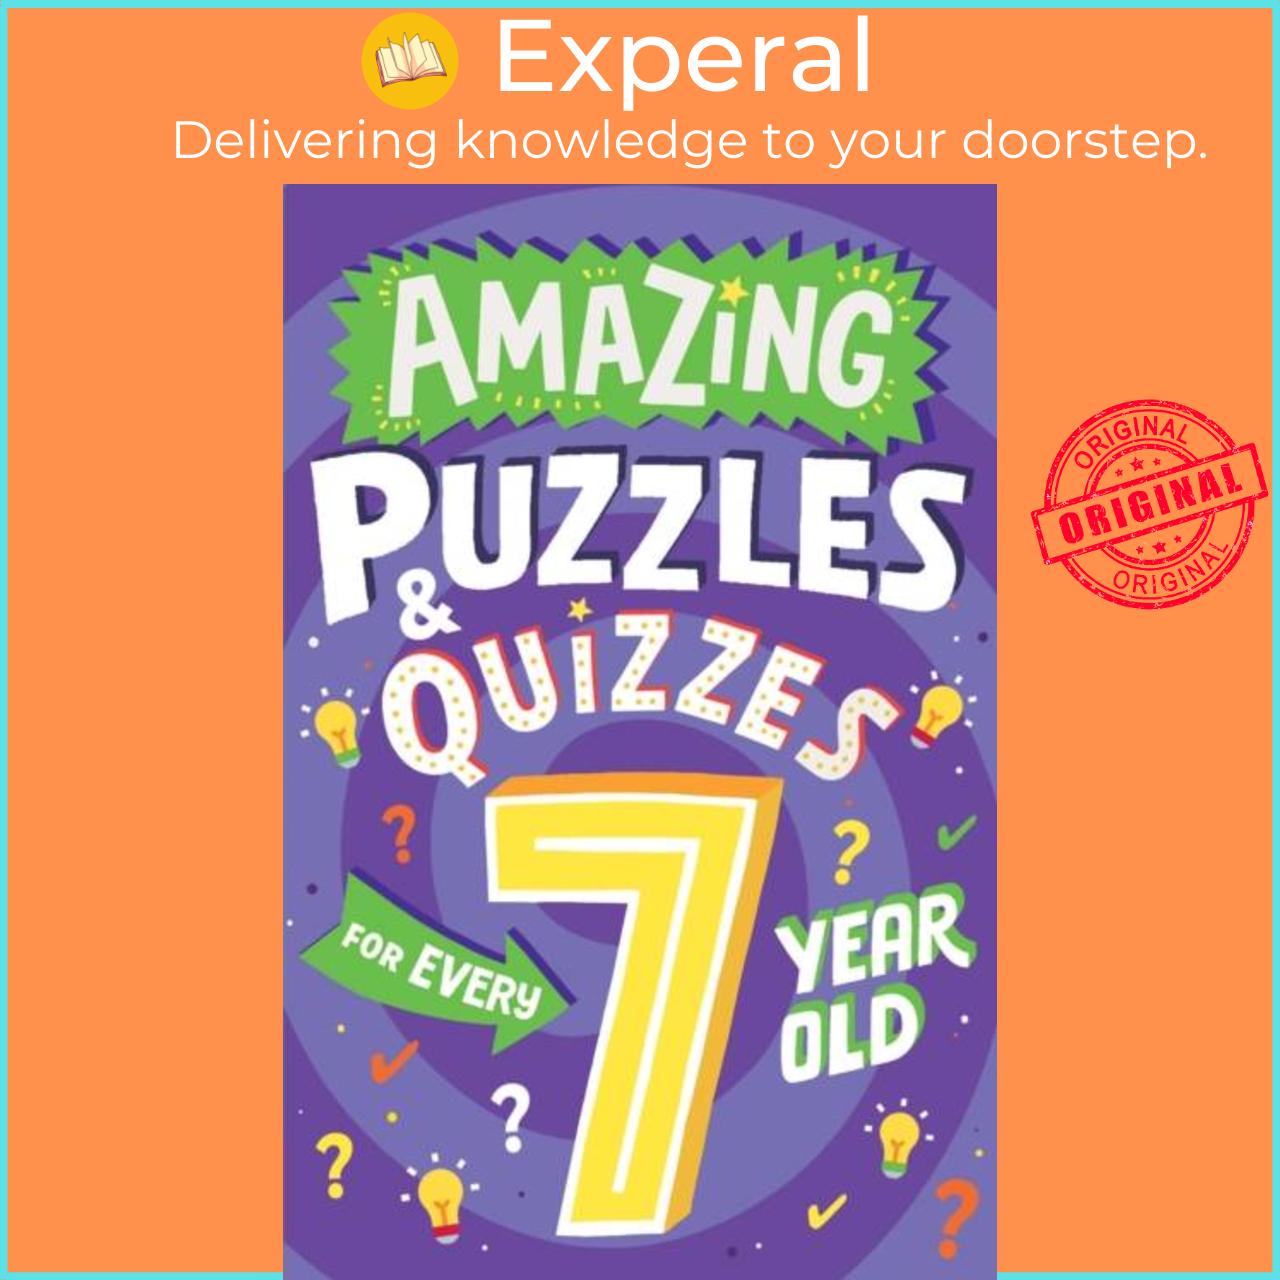 Sách - Amazing Puzzles and Quizzes for Every 7 Year Old by Steve James (UK edition, paperback)